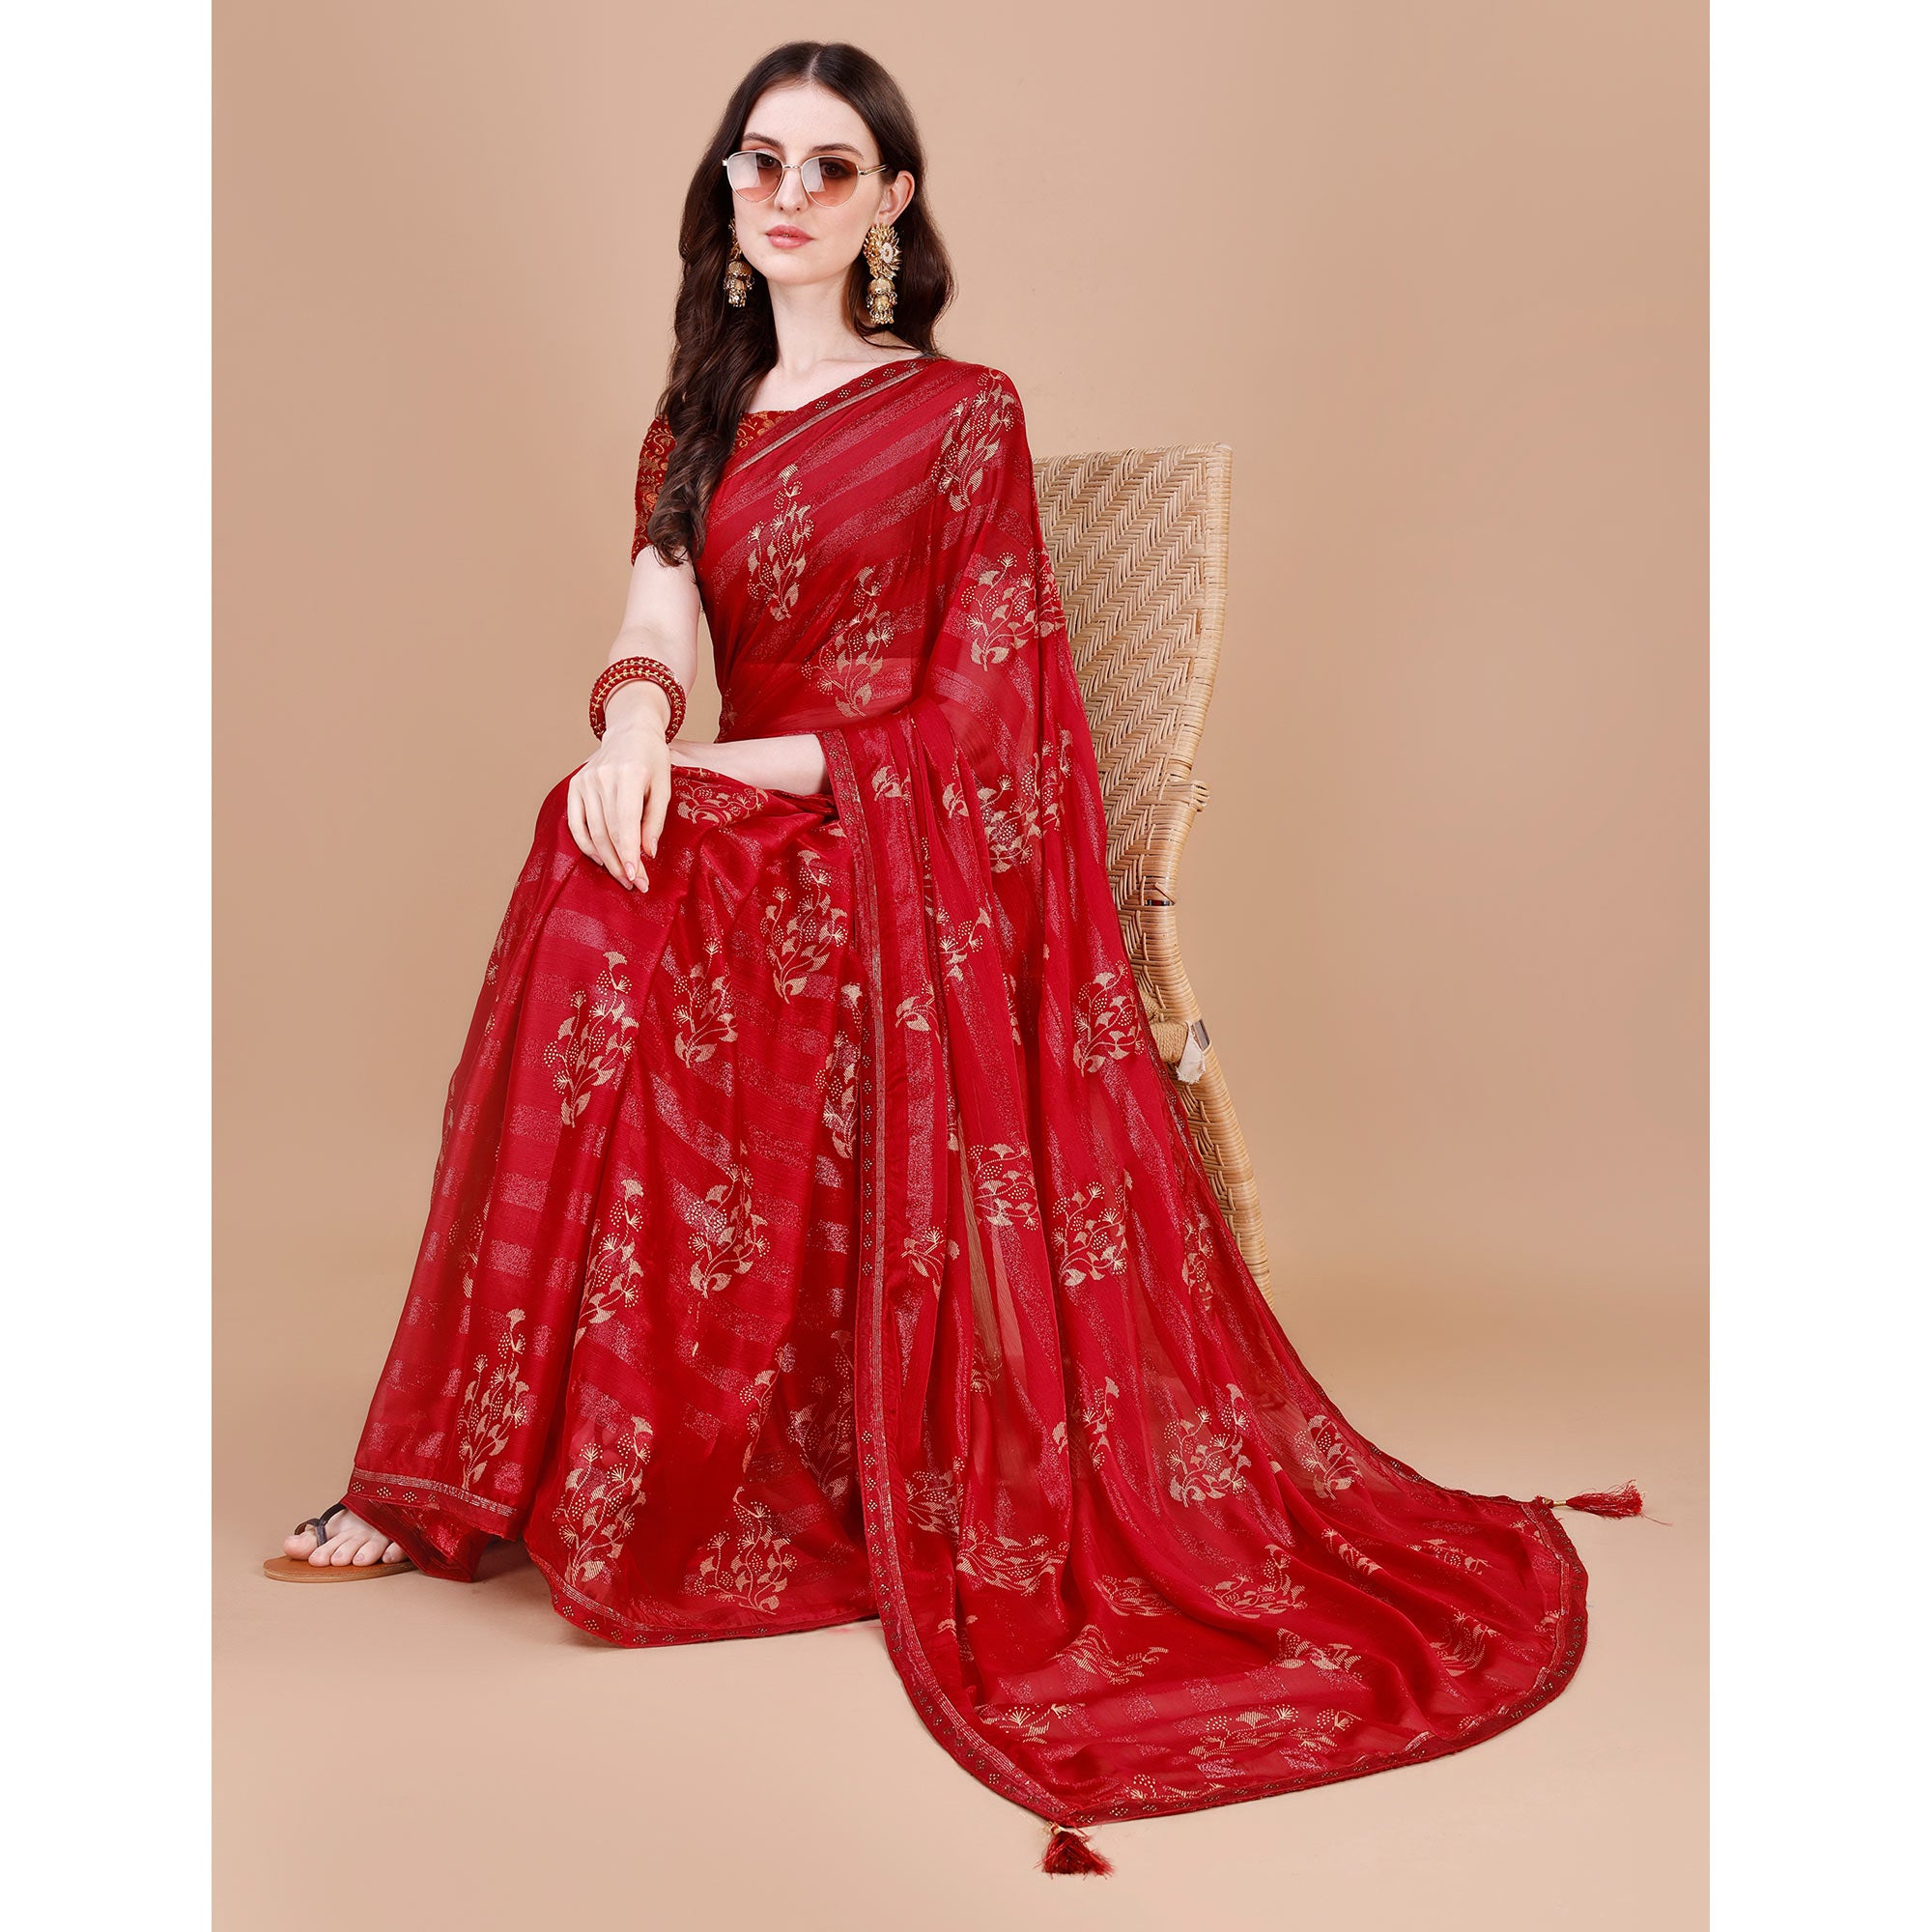 Red Foil Printed Chiffon Saree With Lace Border